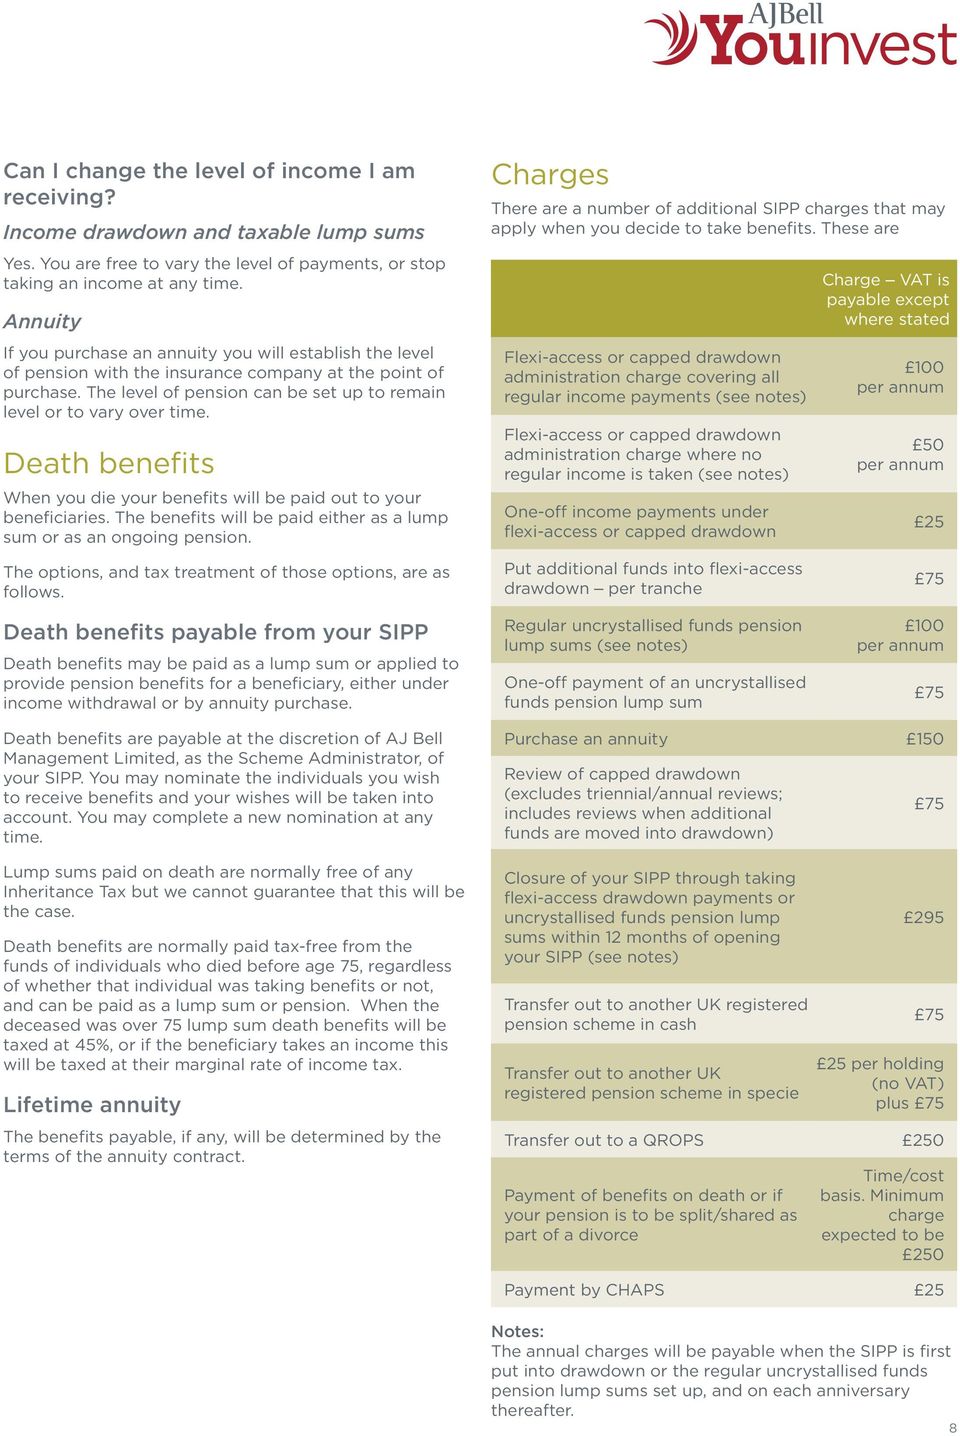 Death benefits When you die your benefits will be paid out to your beneficiaries. The benefits will be paid either as a lump sum or as an ongoing pension.